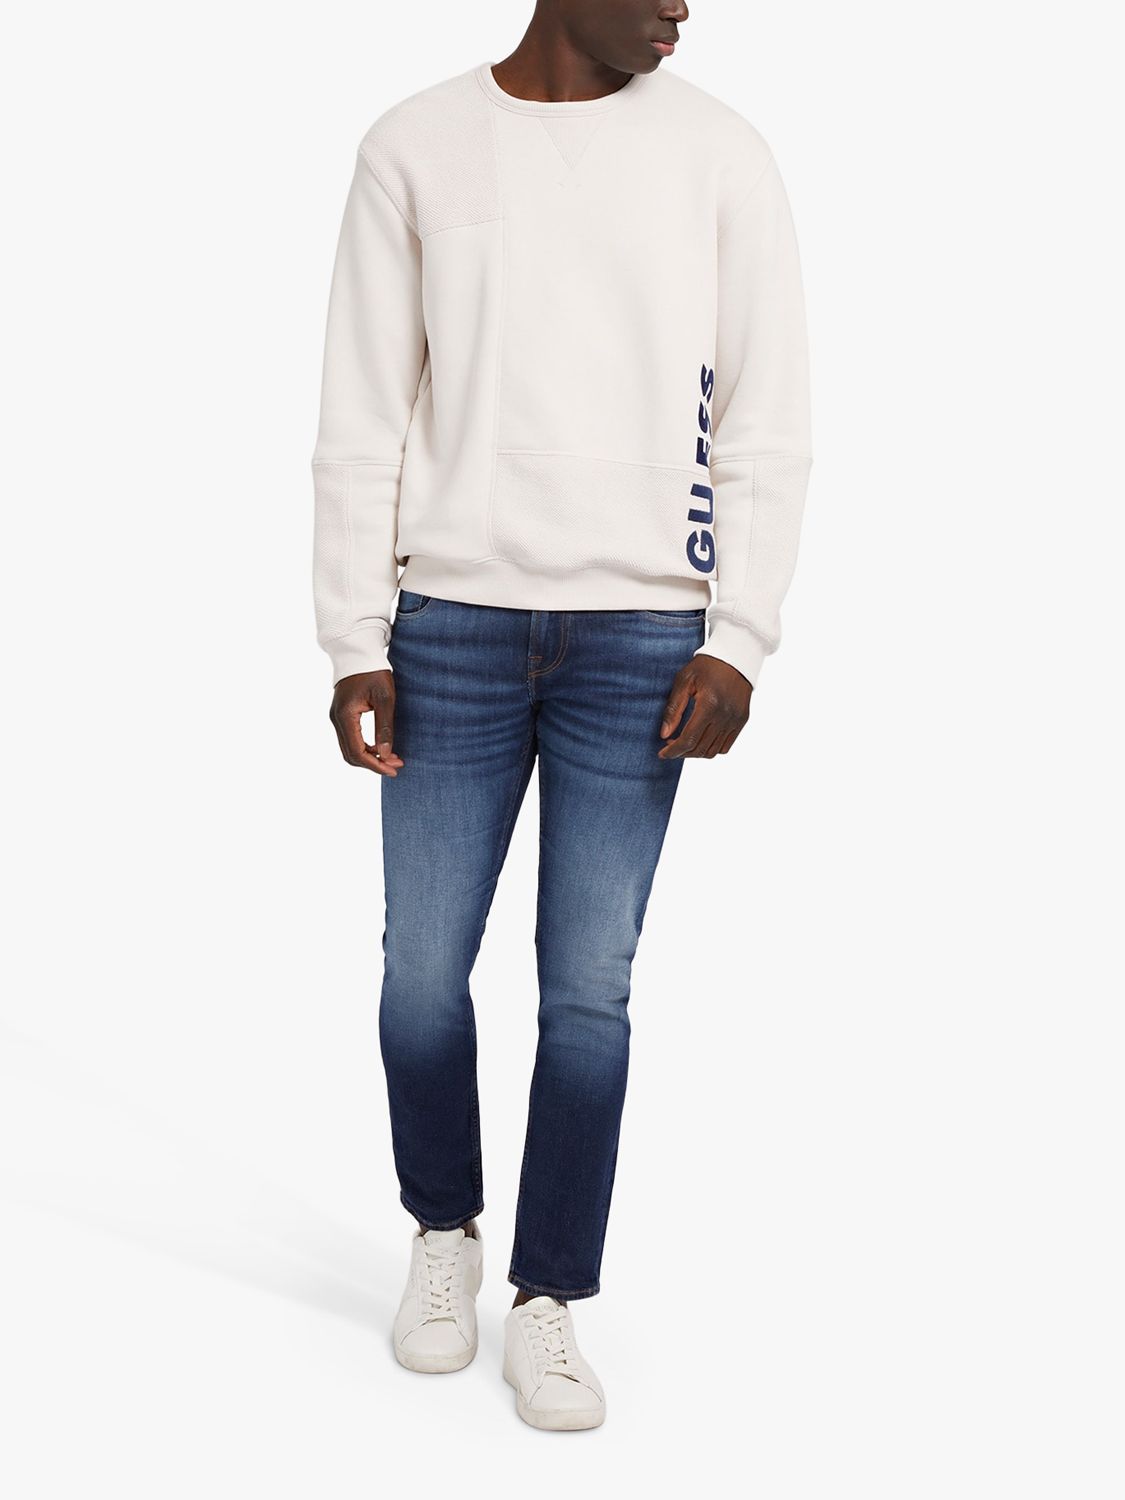 Buy GUESS Miami Skinny Fit Jeans Online at johnlewis.com